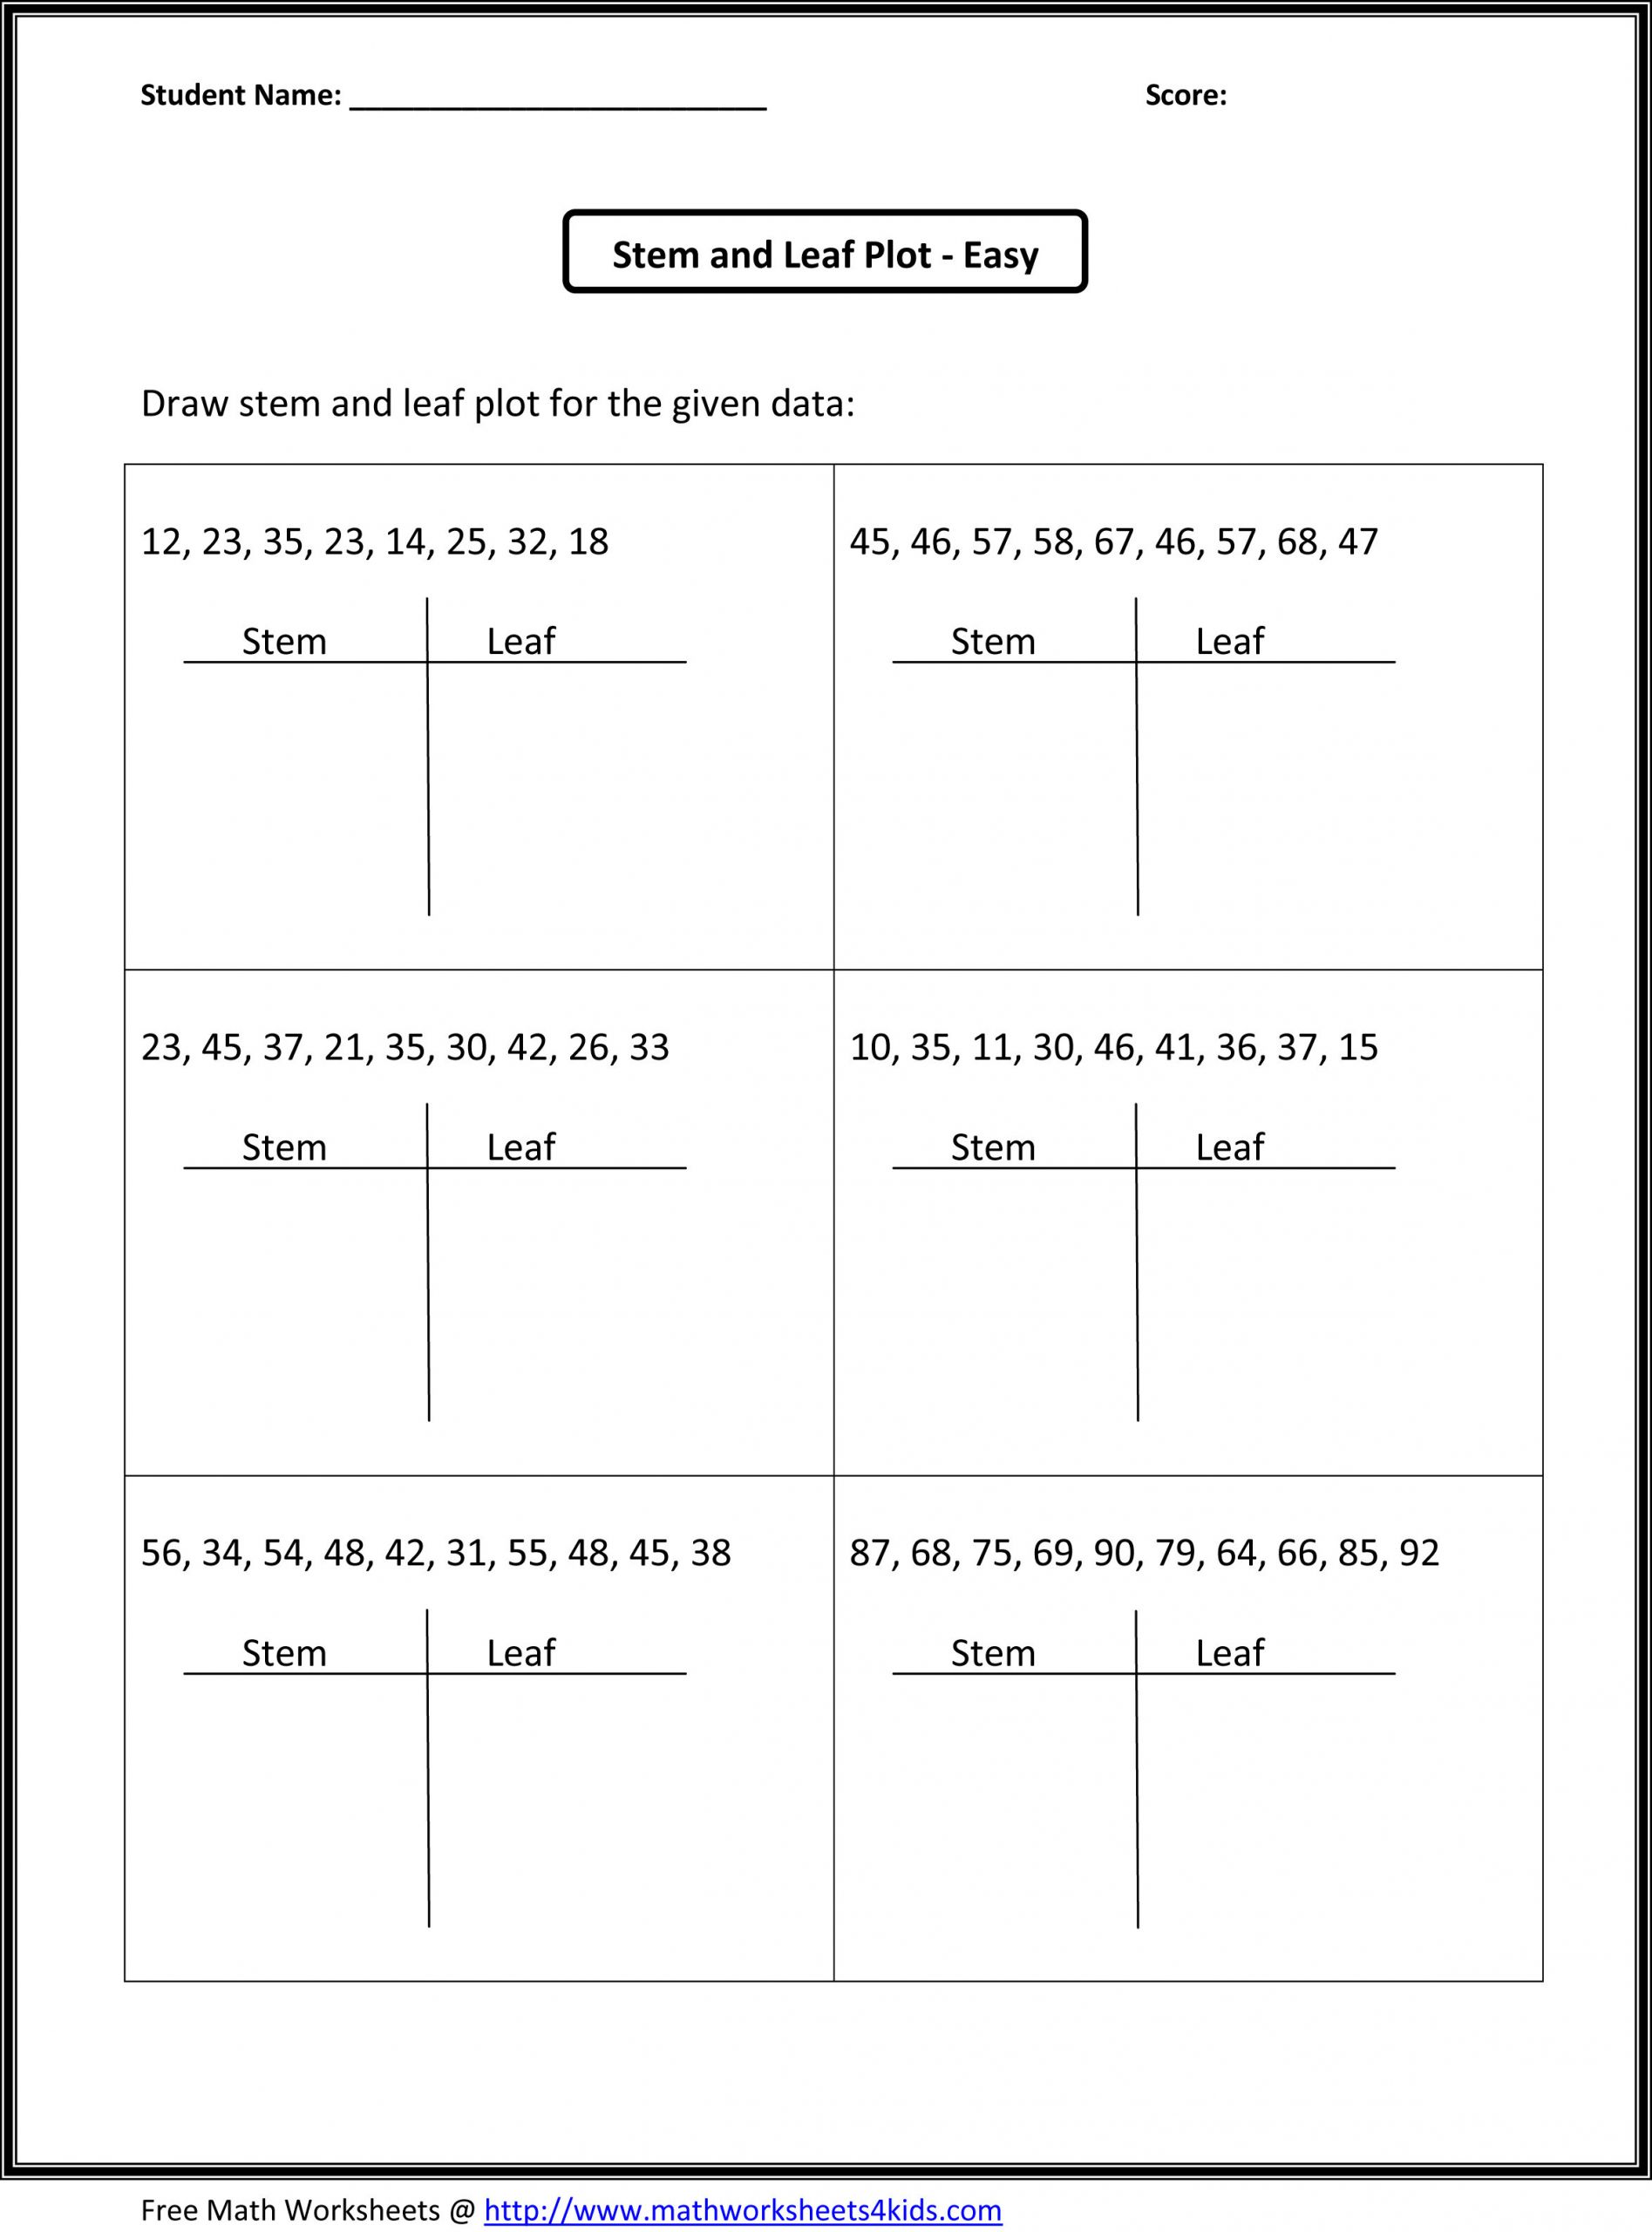 Free Math Worksheets Third Grade 3 Fractions and Decimals Subtracting Fractions Like Denominators